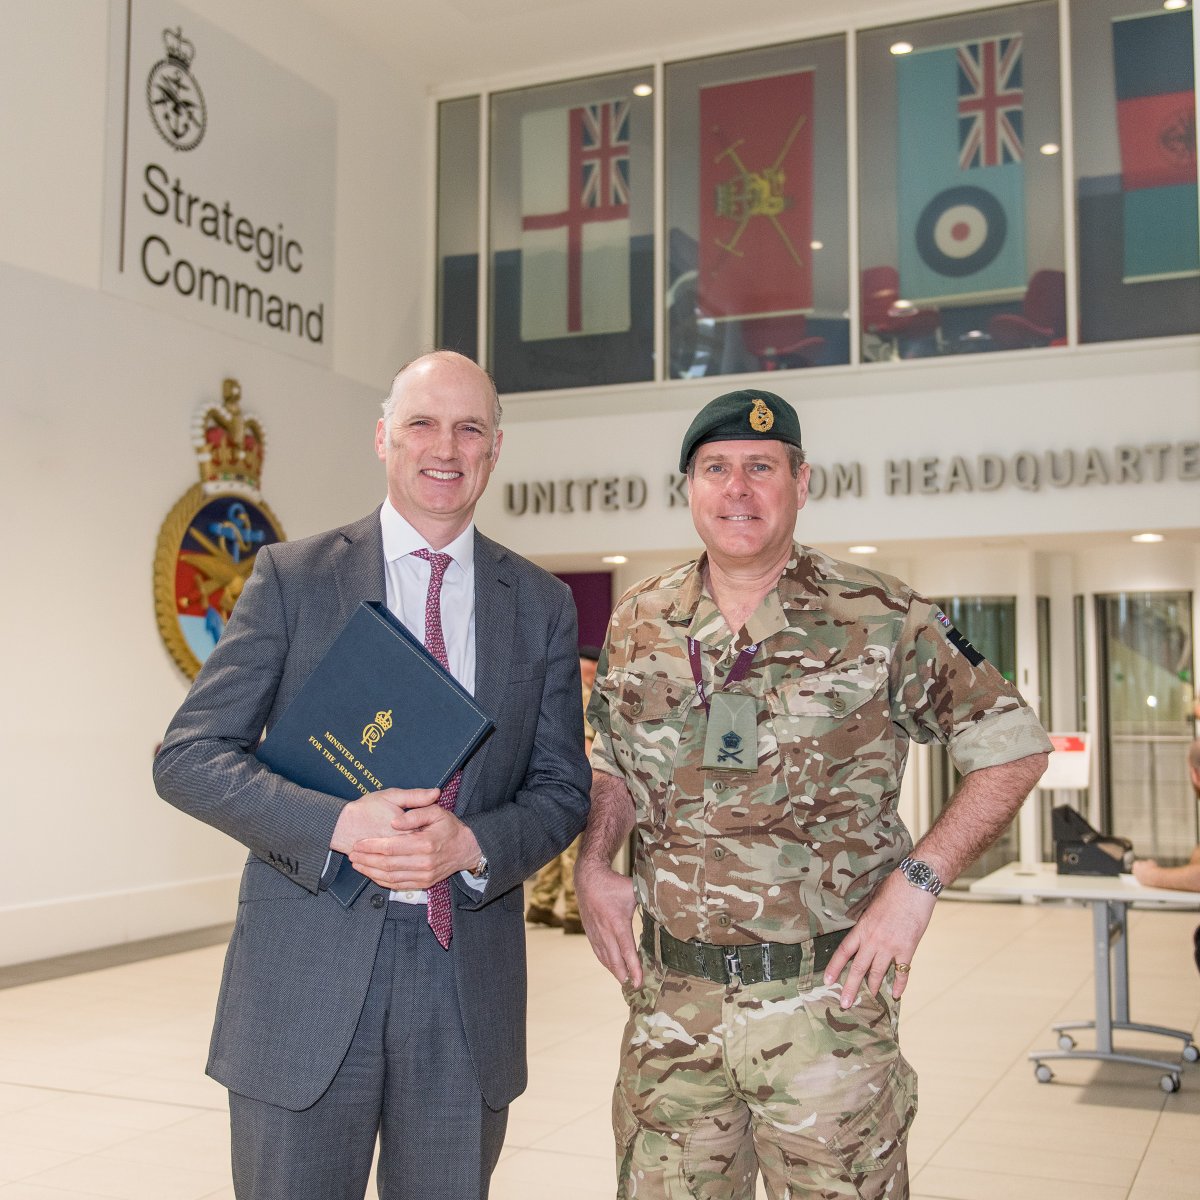 Permanent Joint Headquarters is the hub for controlling the UK’s overseas military operations. Armed Forces Minister @leodochertyuk today met the Deputy Commander of @UKStratCom & spoke with personnel who supported the RAF operation which destroyed Iranian drones at the weekend.